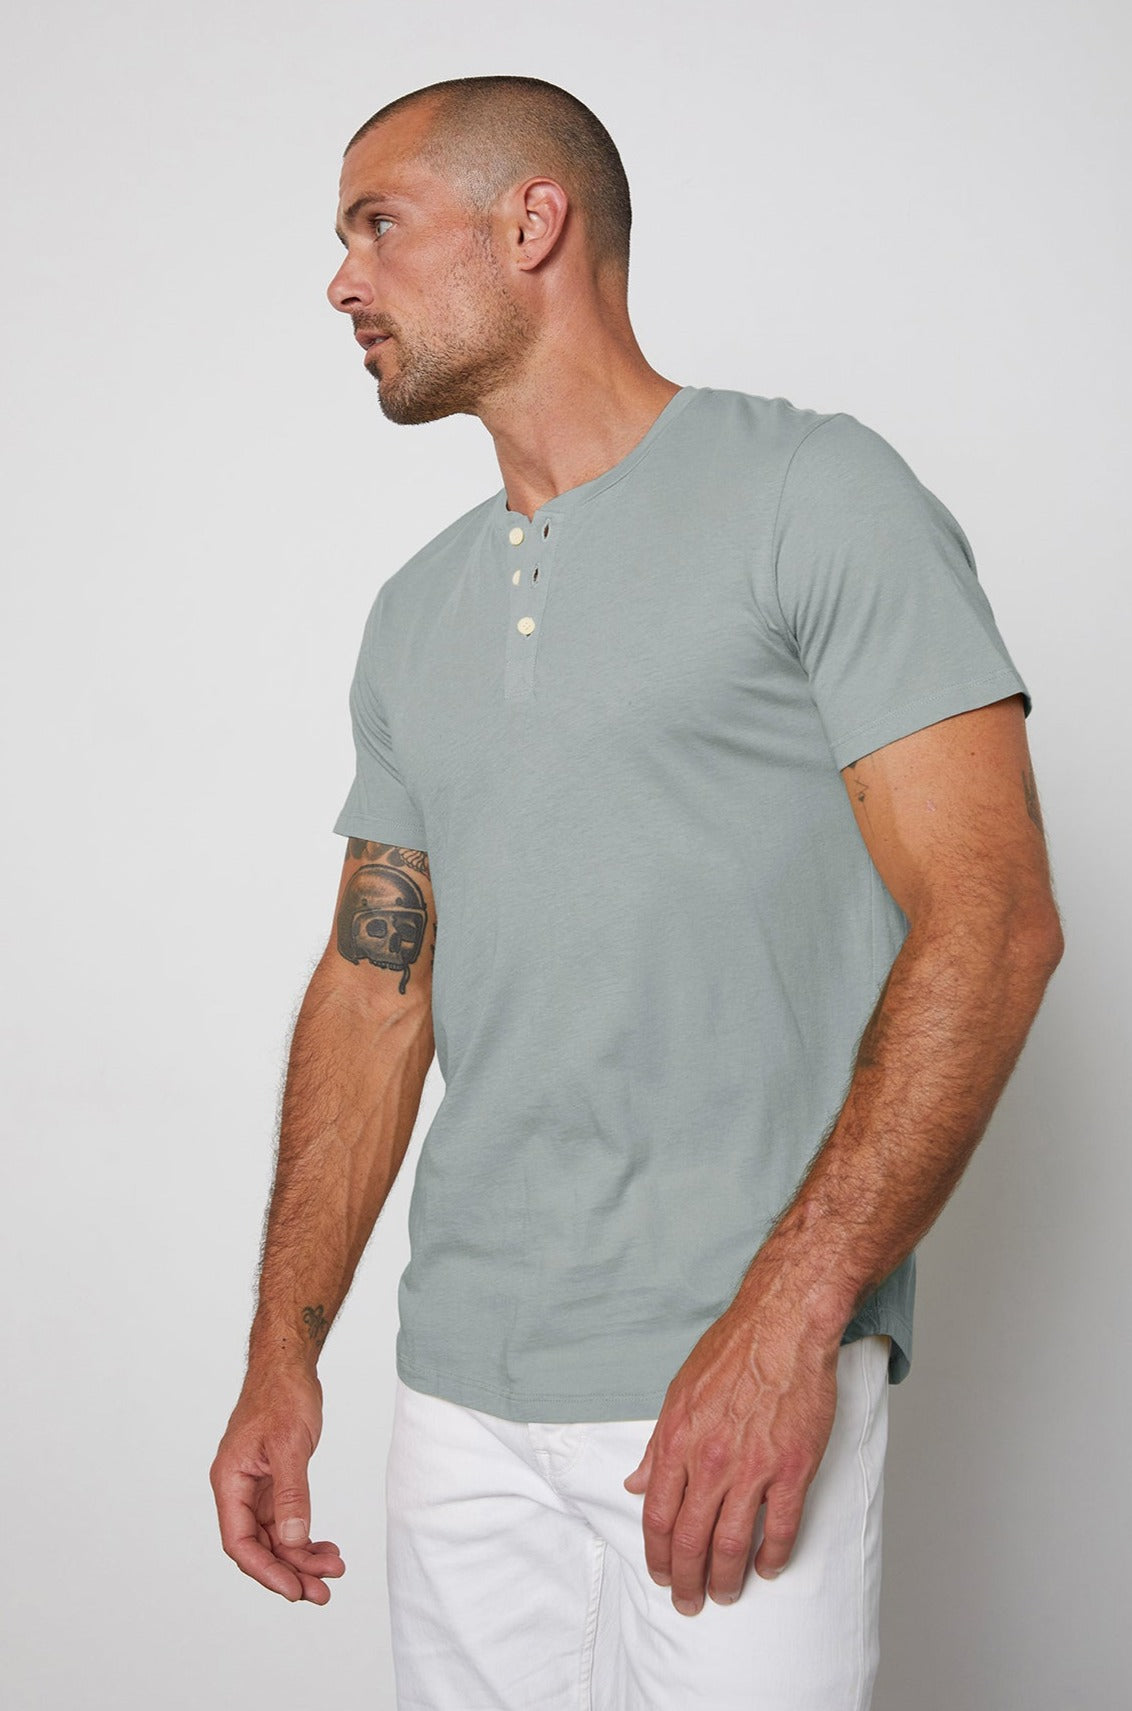 Fulton Short Sleeve Henley in ice blue with white denim front & side-26630311116993